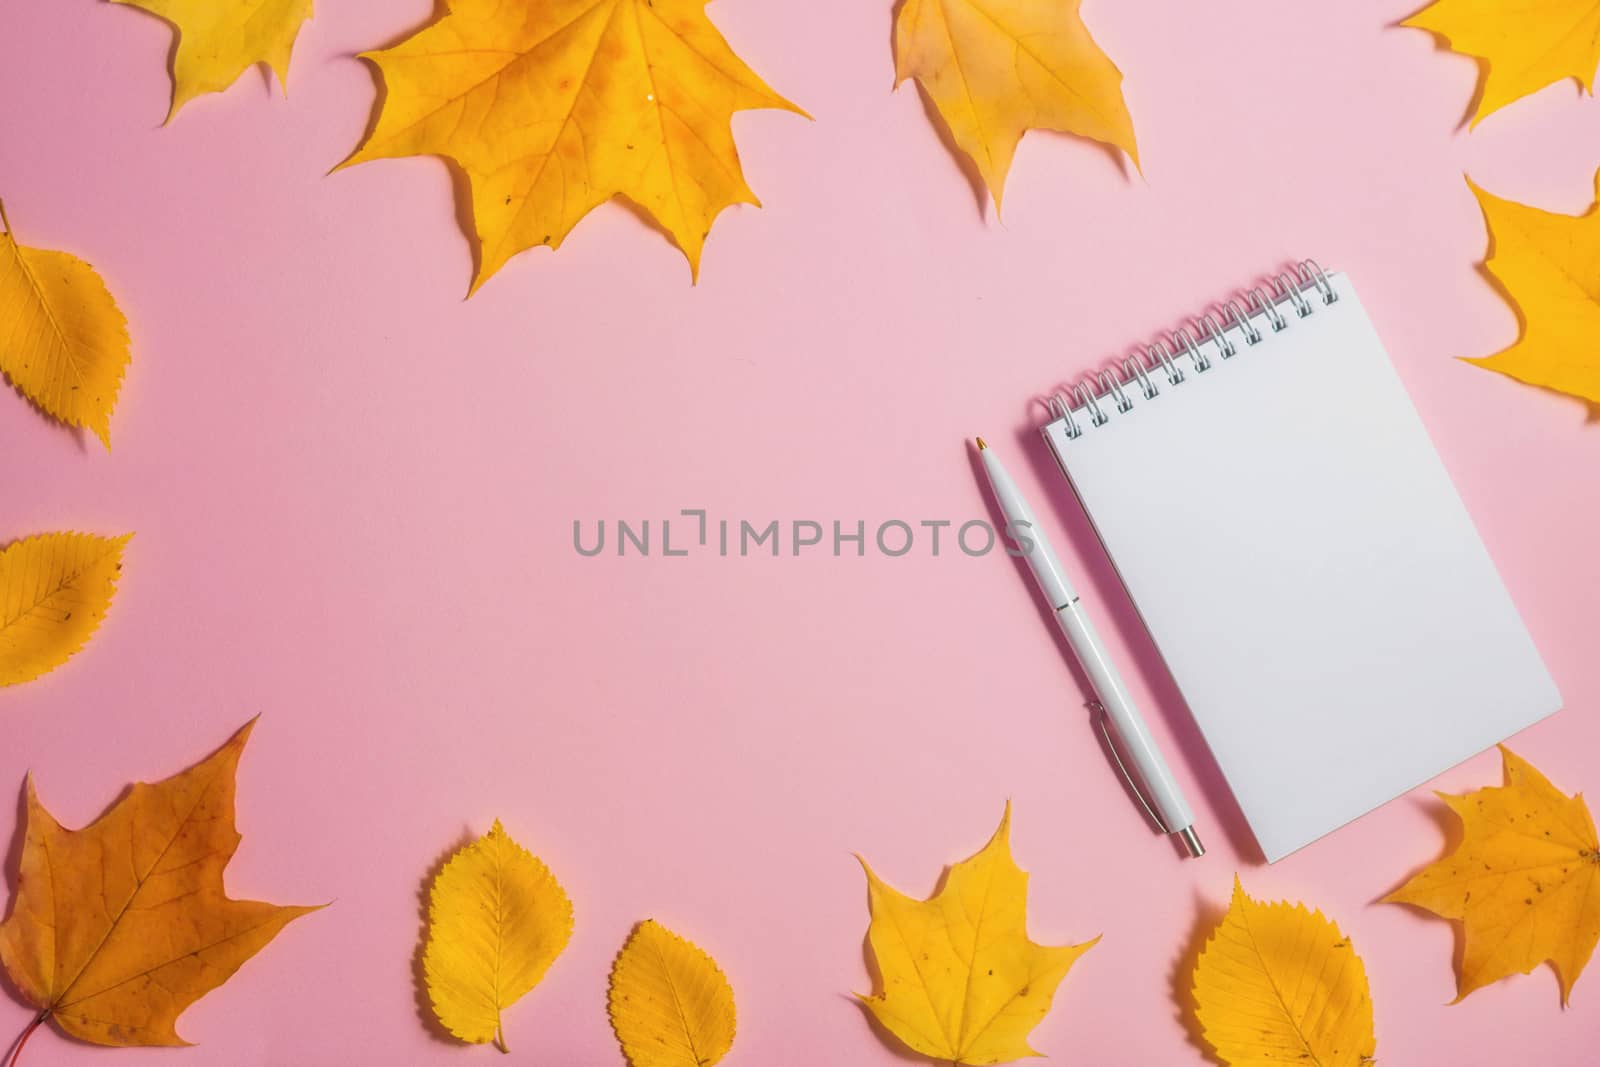 back to school theme with autumn leaves and stationery by galinasharapova